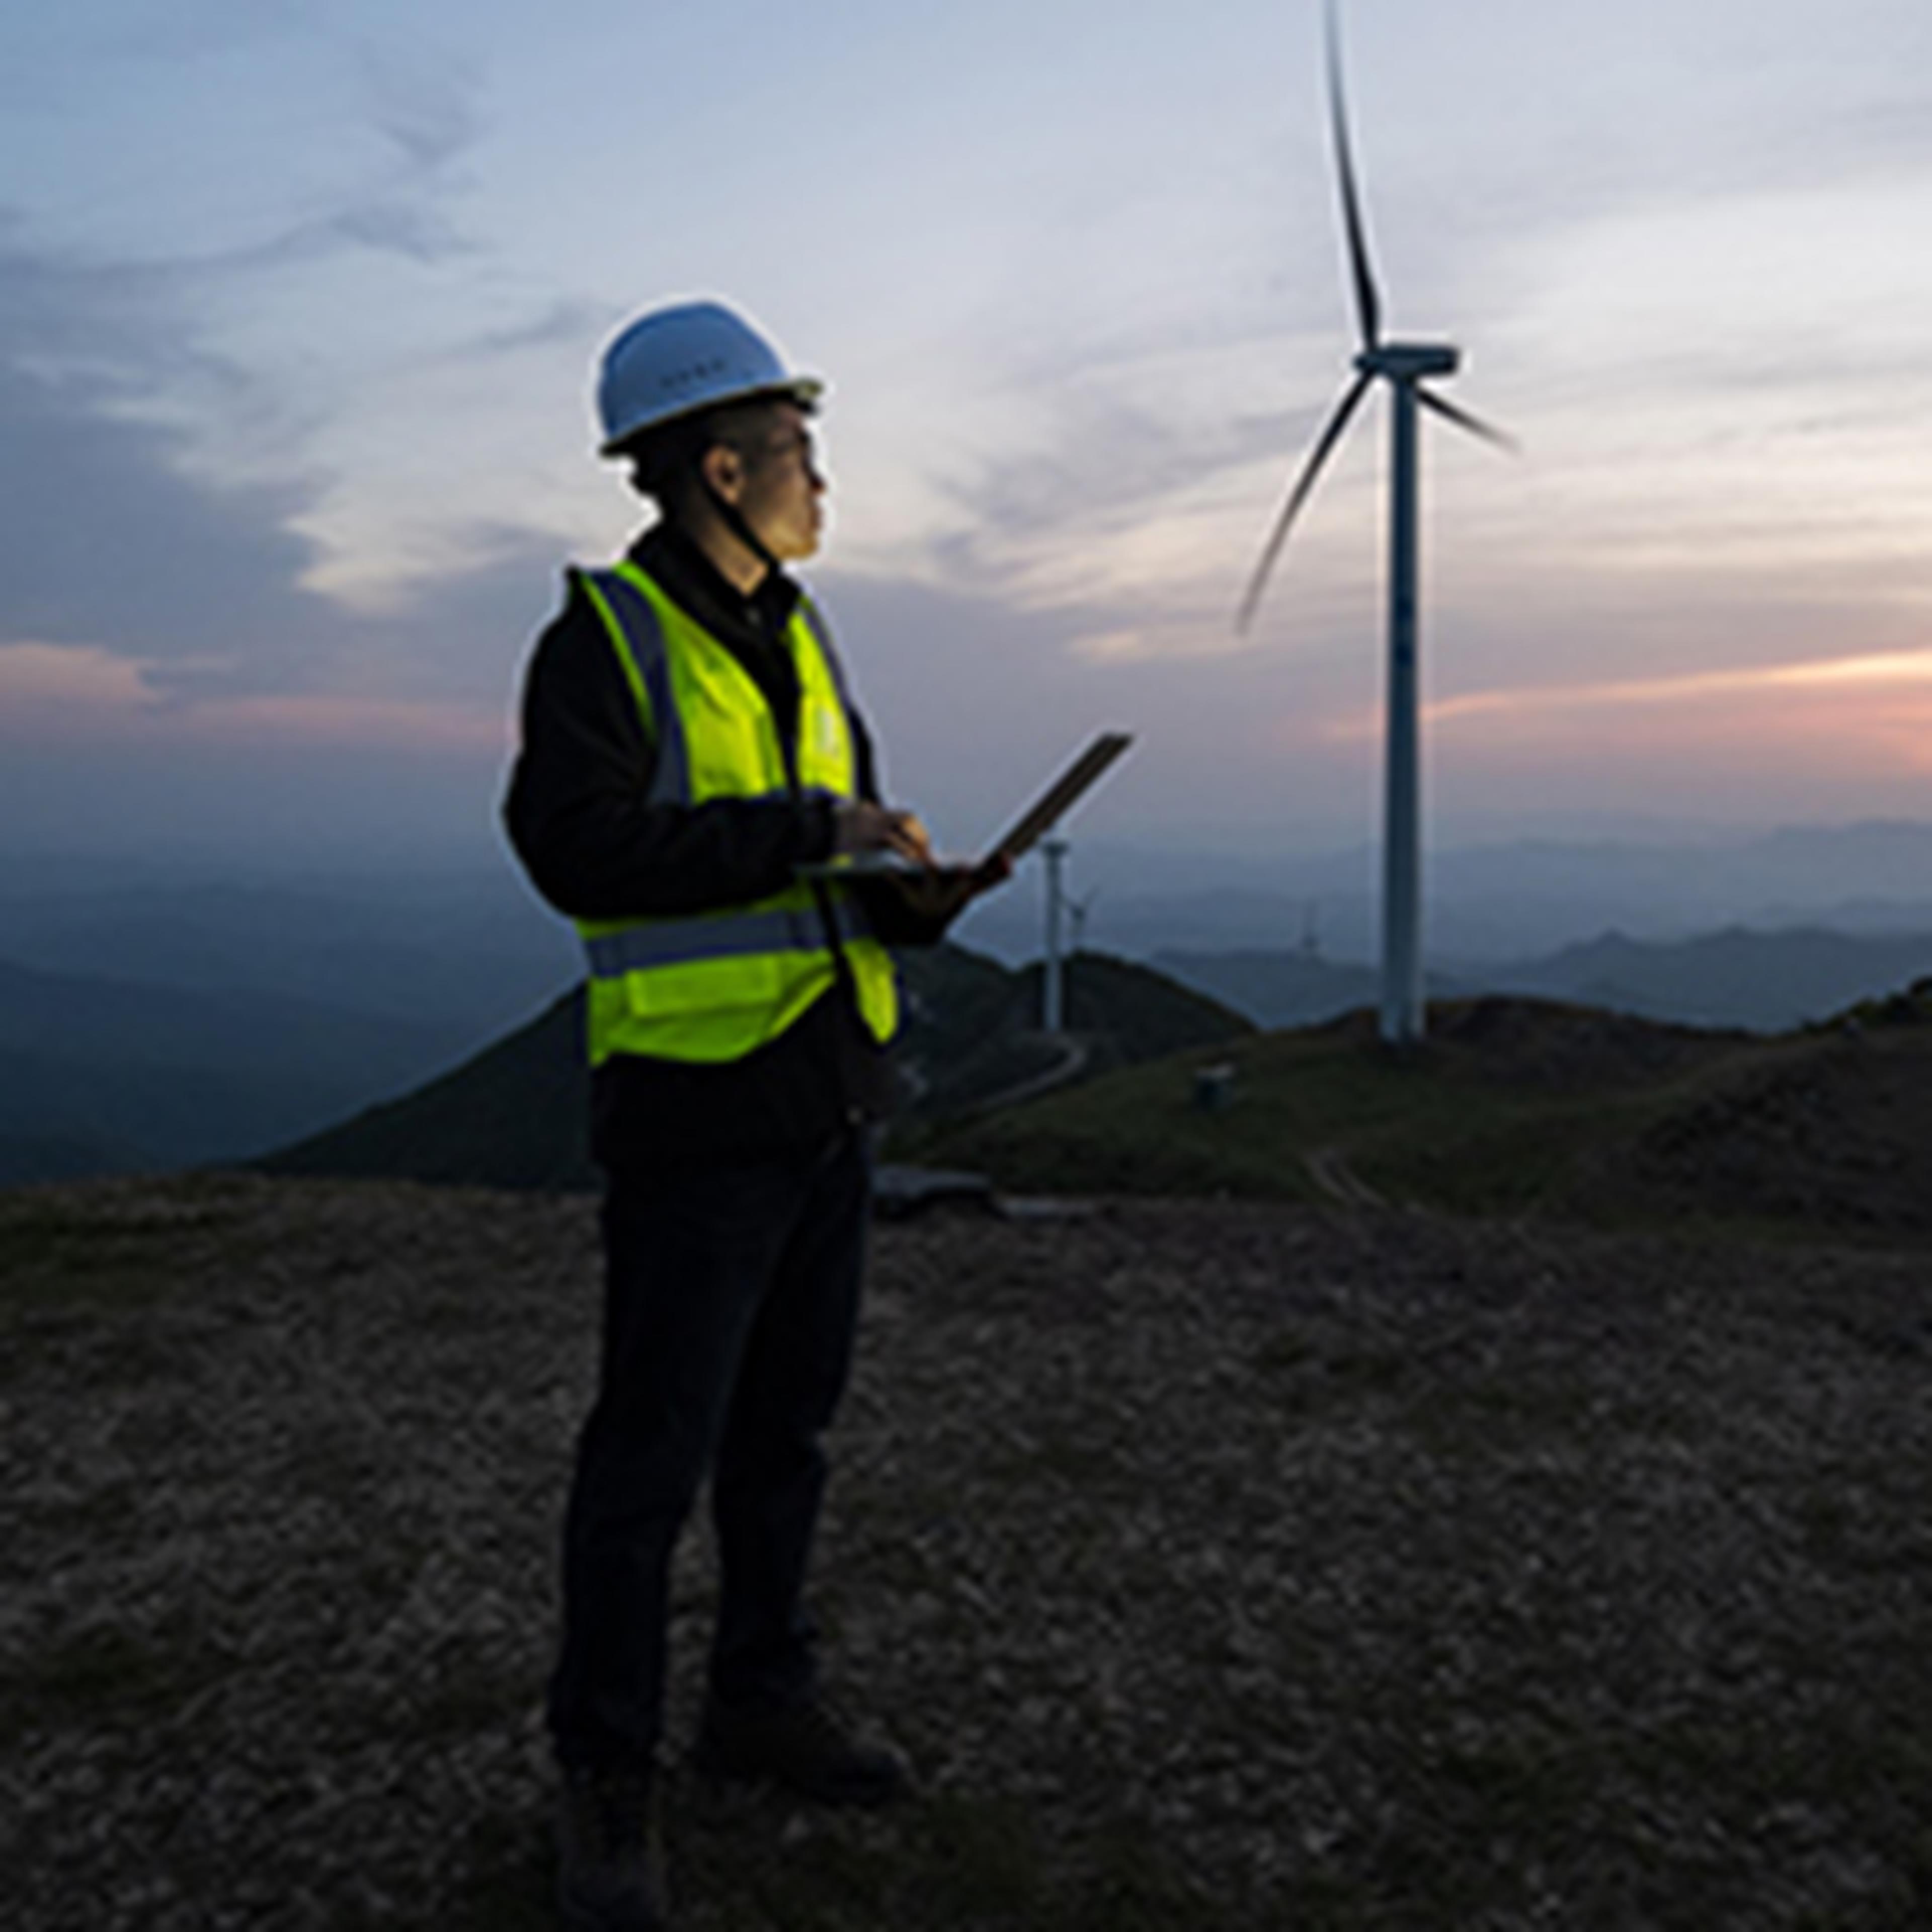 A man standing in front of wind turbines